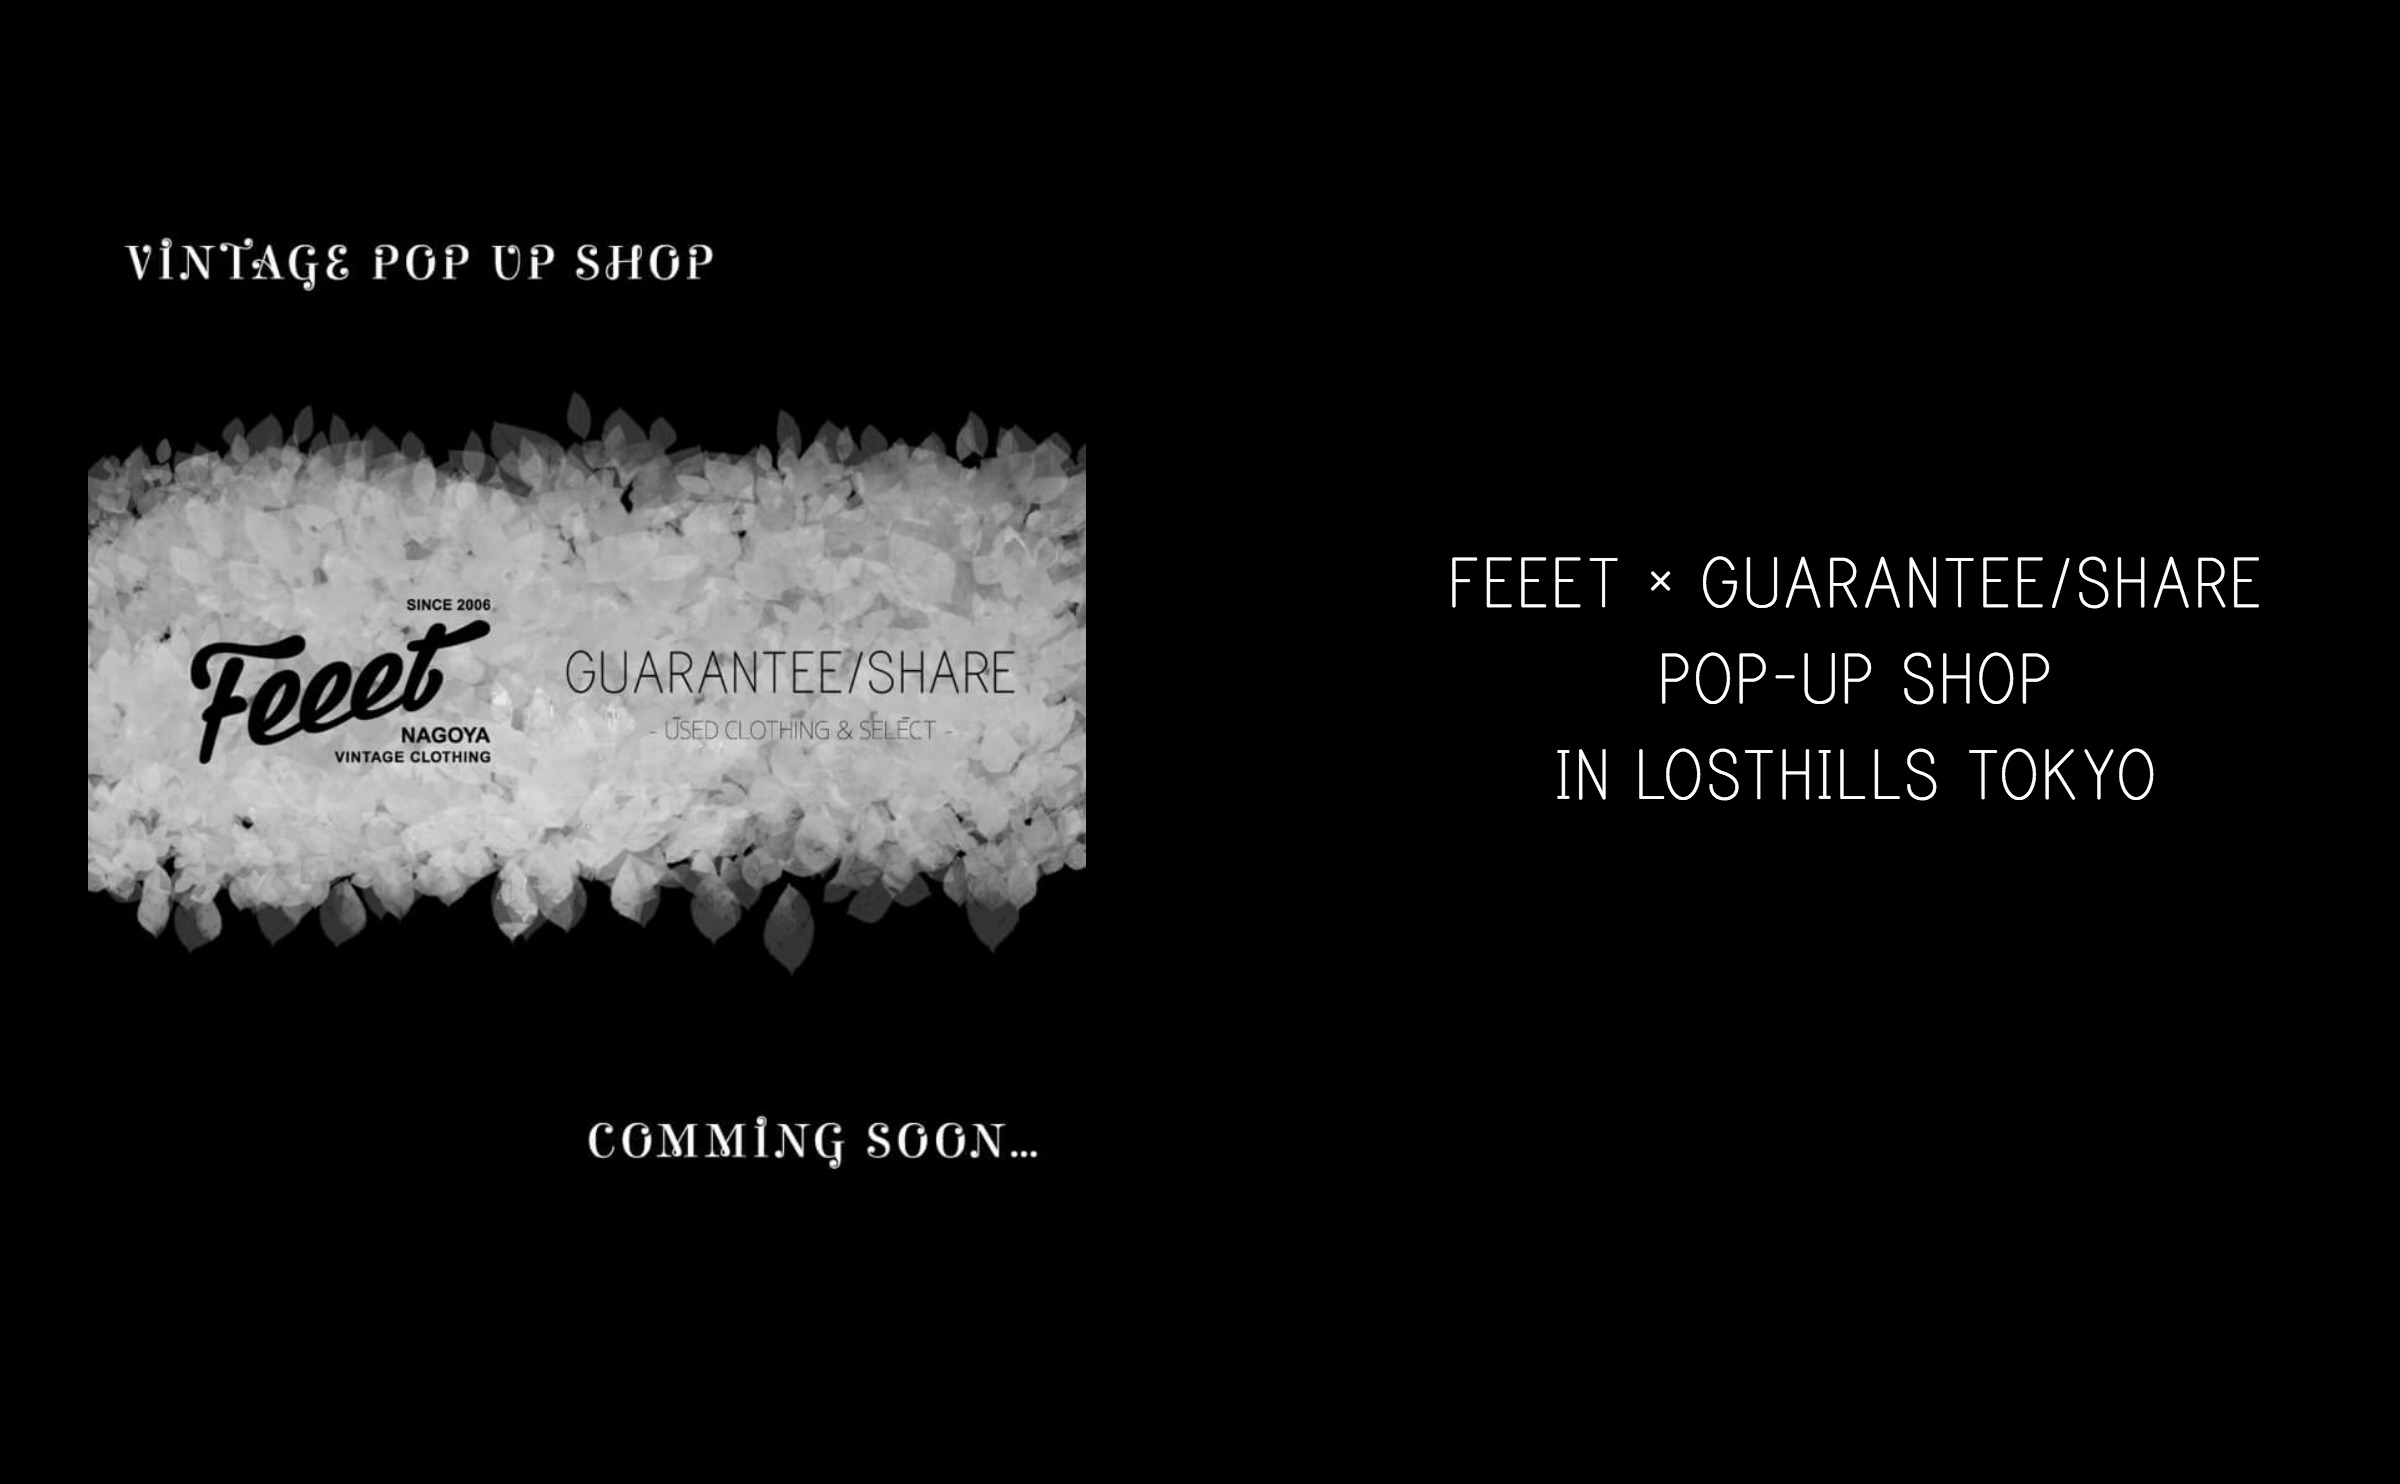 FEEET × GUARANTEE/SHARE POP-UP SHOP IN LOSTHILLS TOKYO